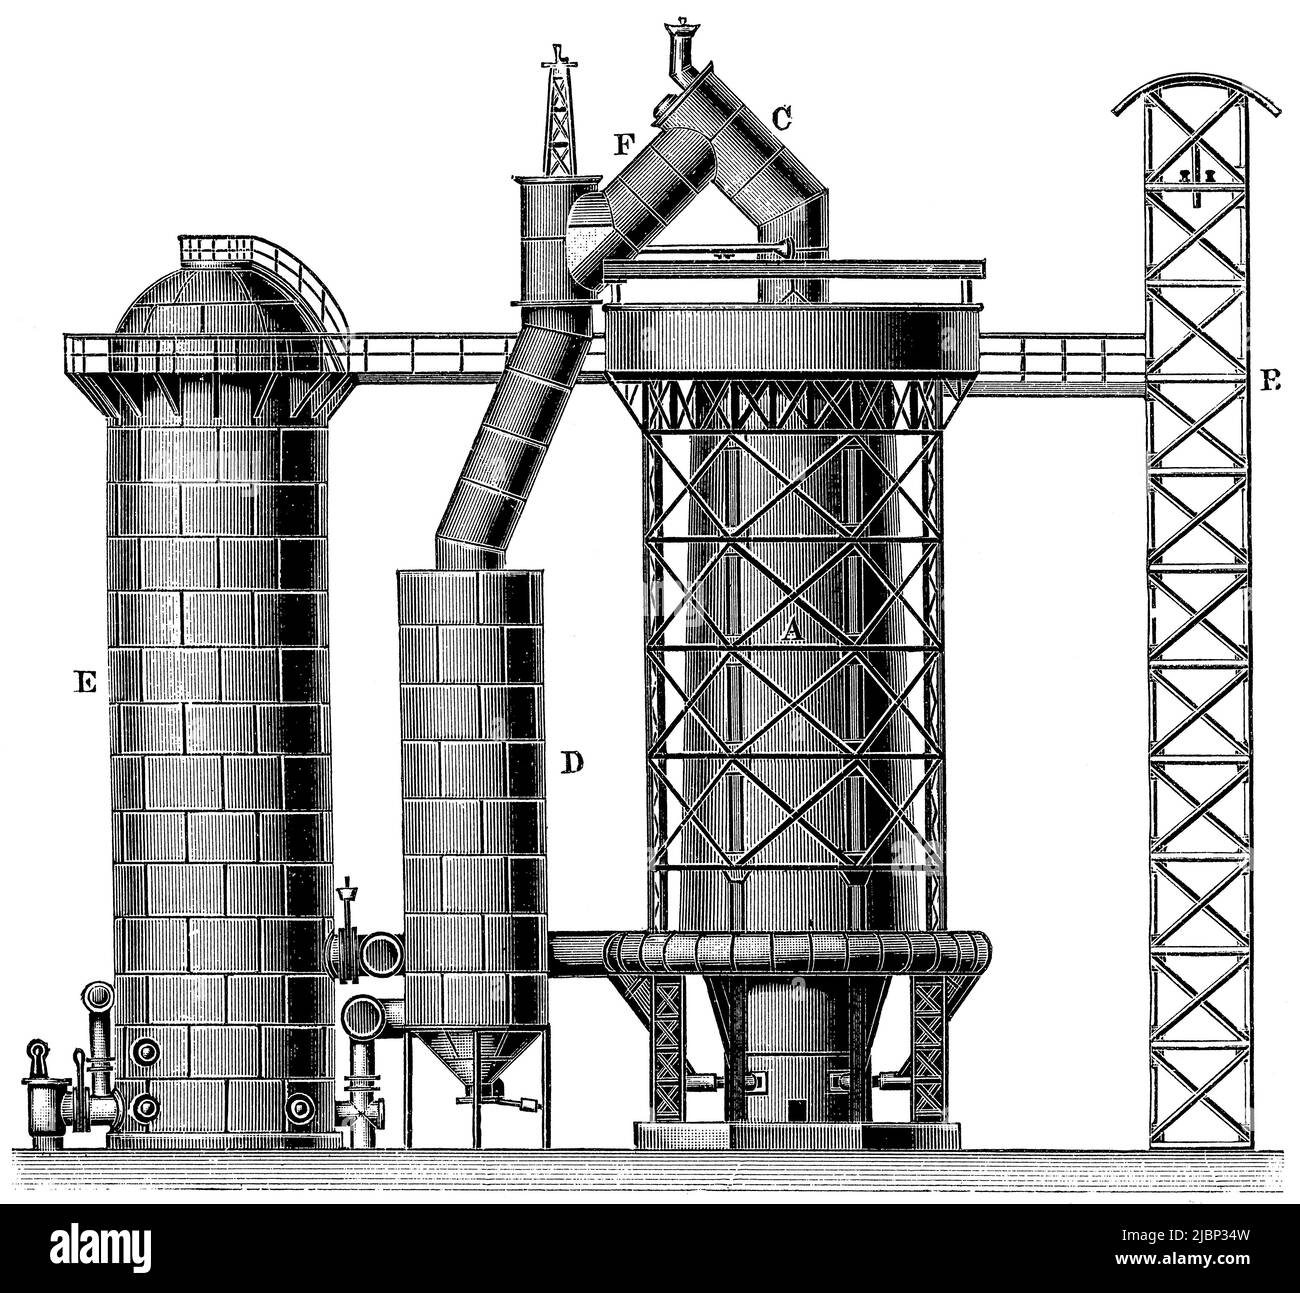 Blast furnace with top elevator tower, top gas cleaning system and hot blast stove. Publication of the book 'Meyers Konversations-Lexikon', Volume 2, Leipzig, Germany, 1910 Stock Photo